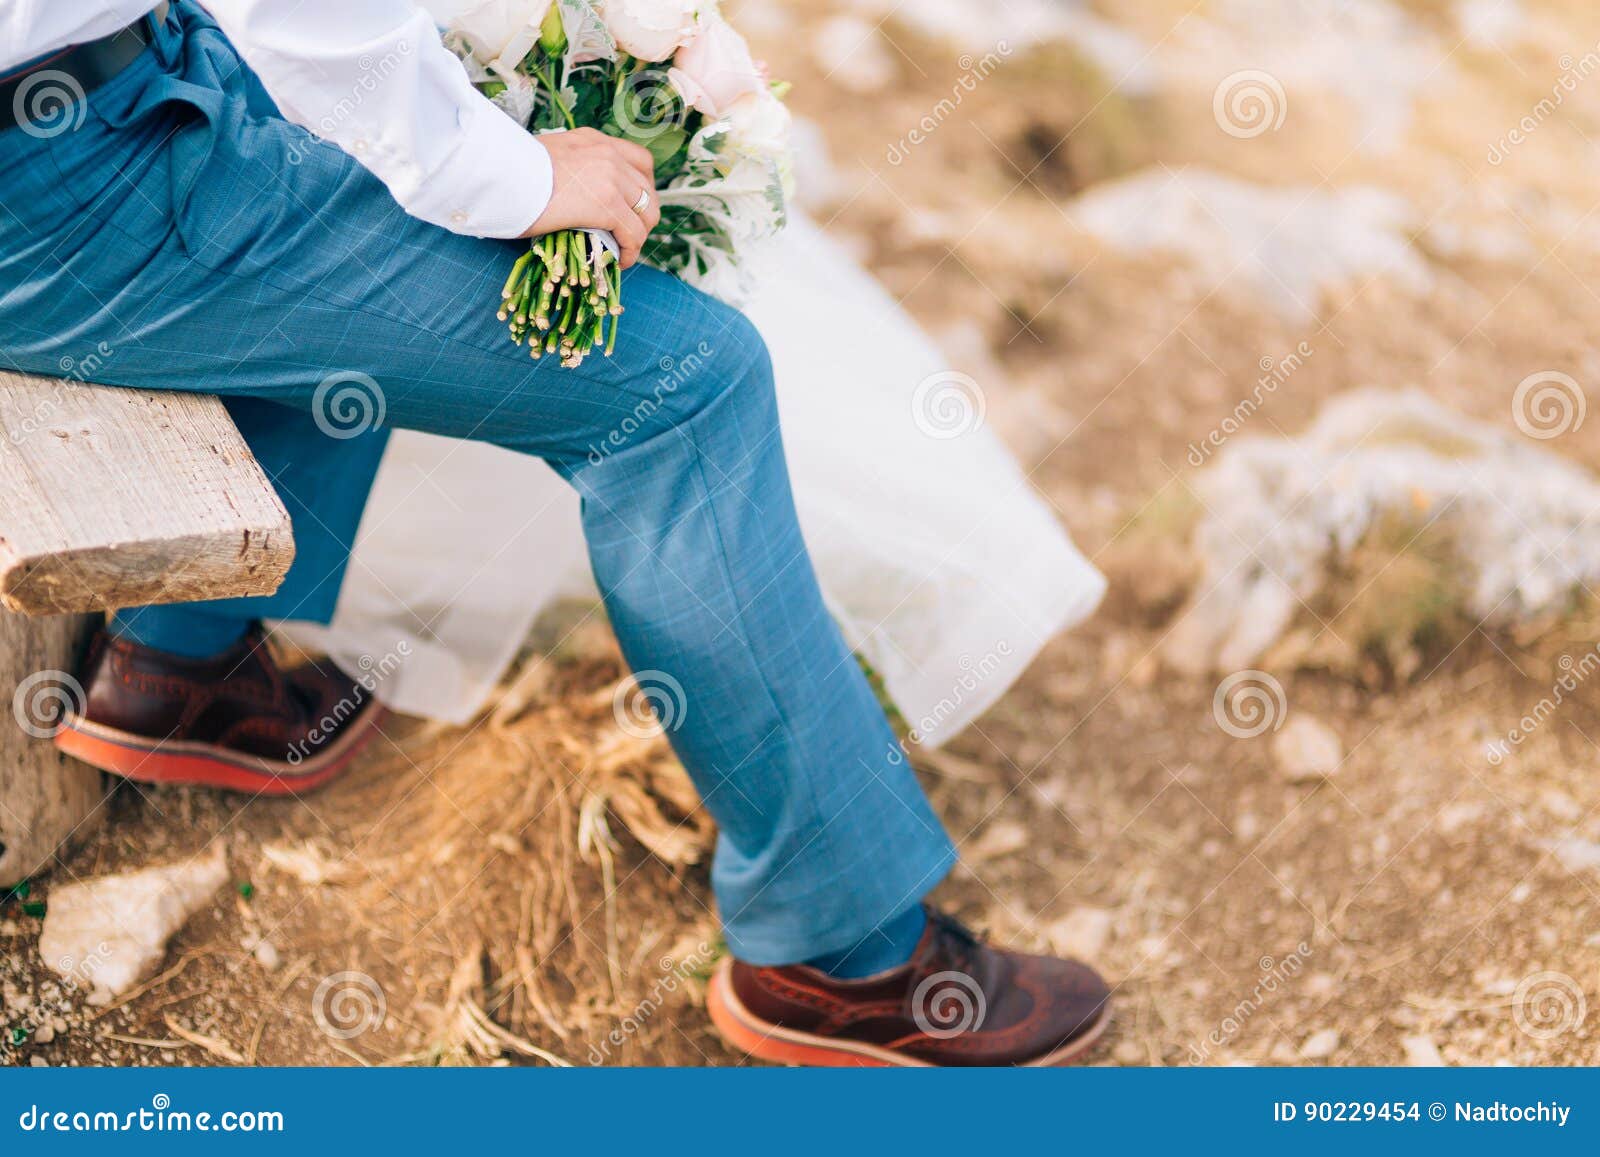 Brown shoes on male legs stock photo. Image of color - 90229454